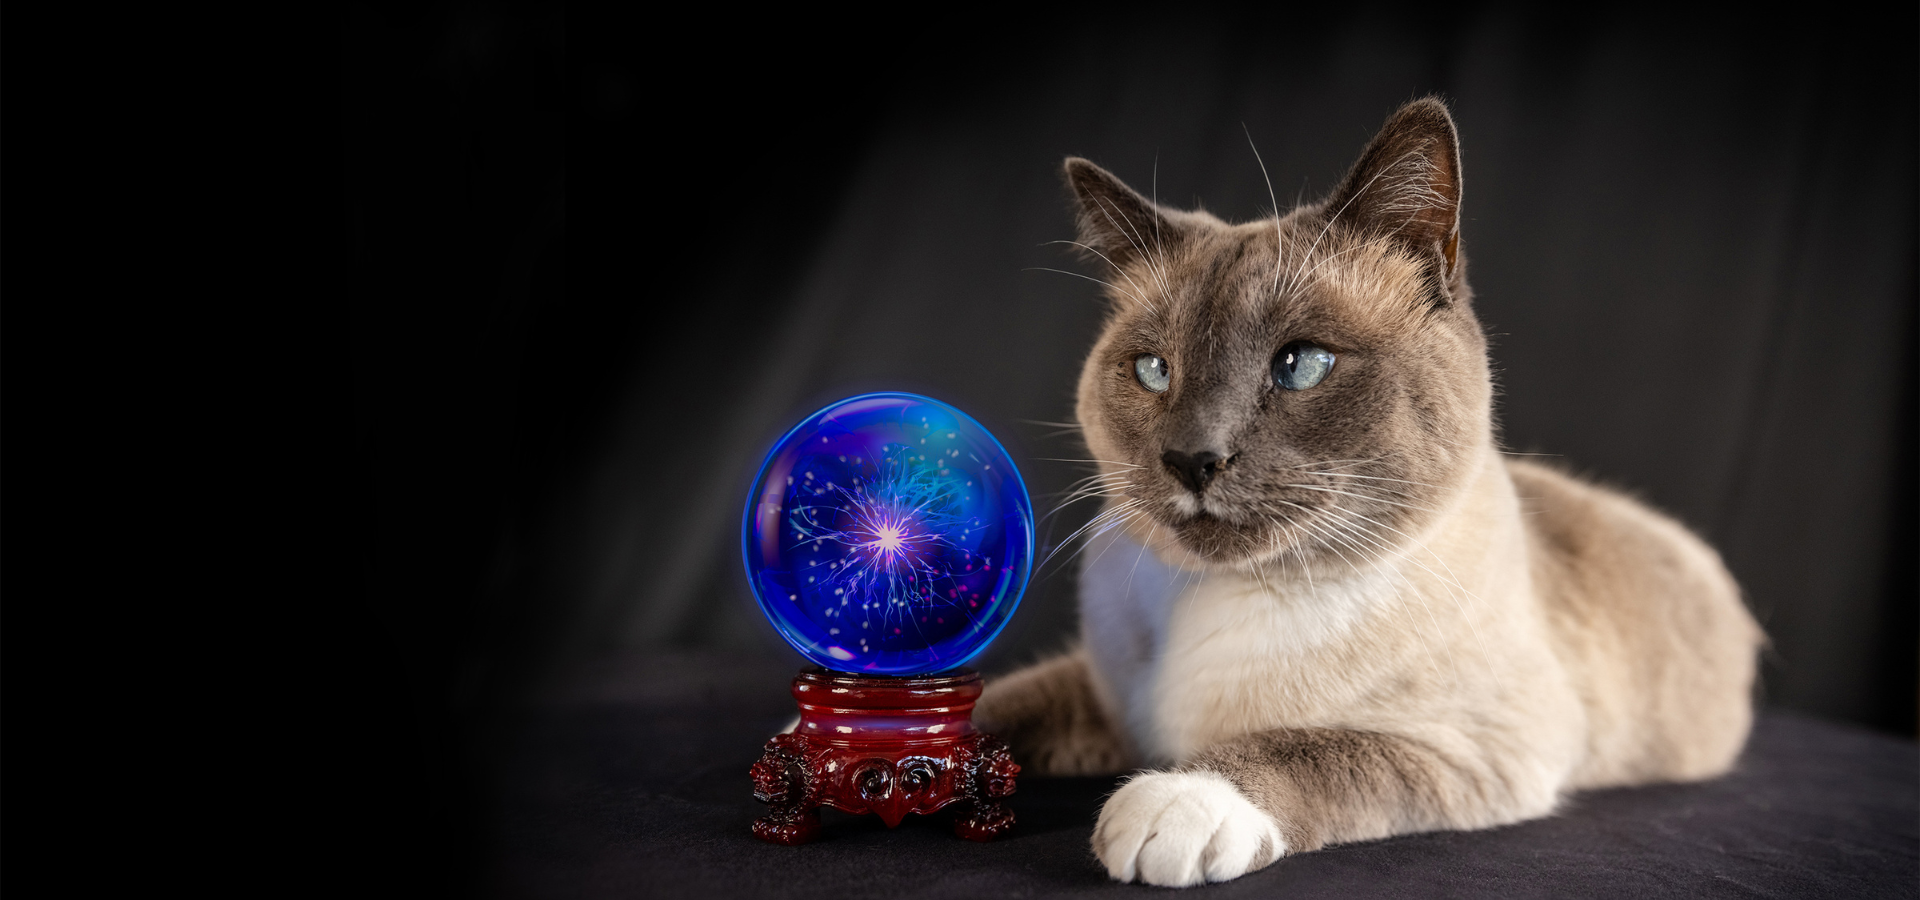 Lincoln the Cat with Crystal ball and posing for camera